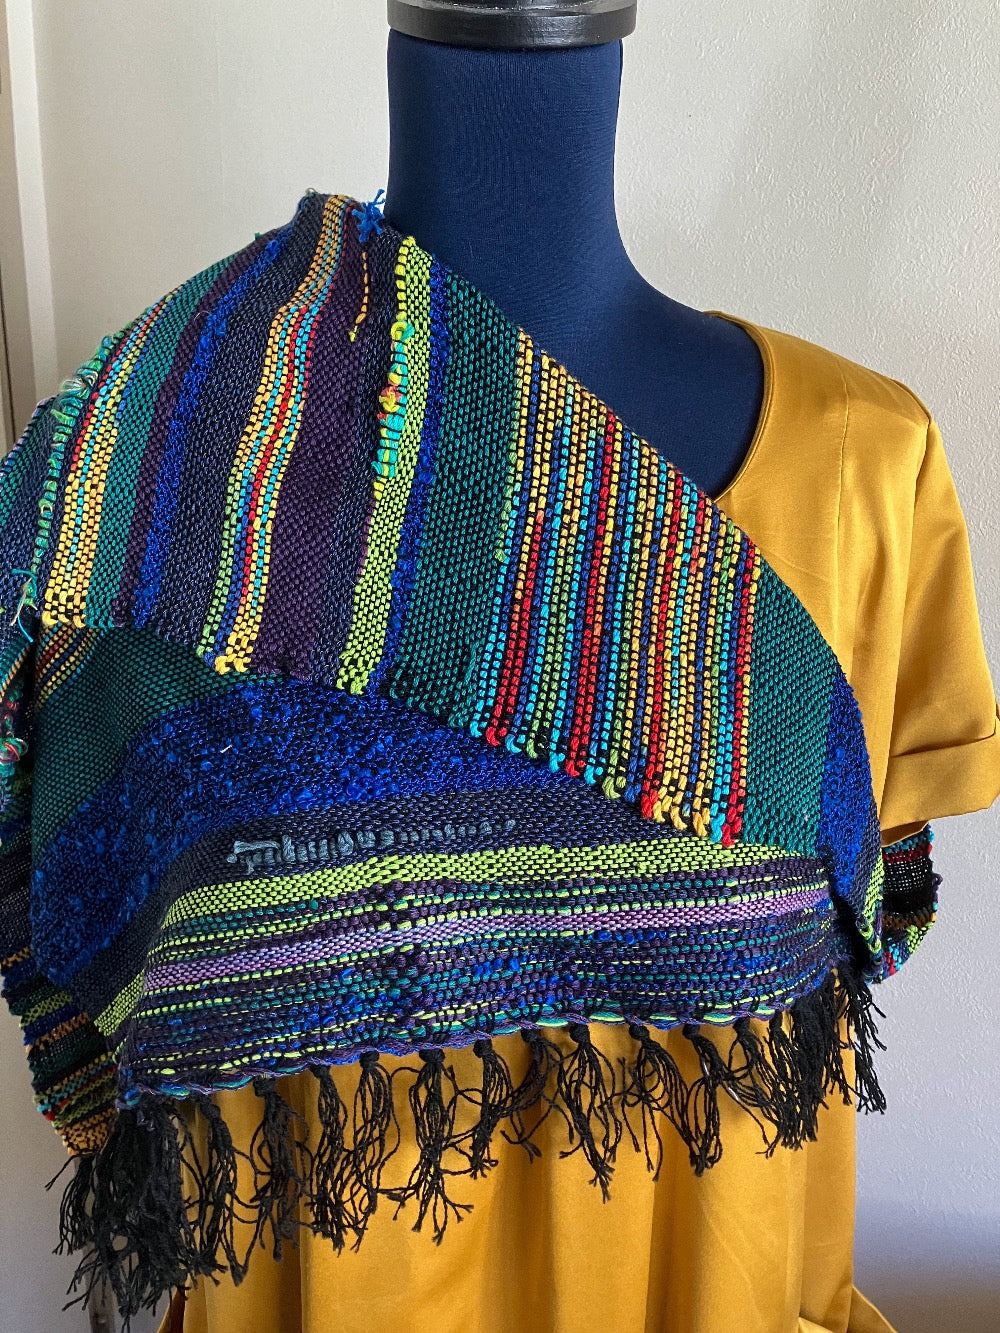 Alternative way to wear neon and jewel tones shawl scarf over one shoulder, on mannequin dressed in gold